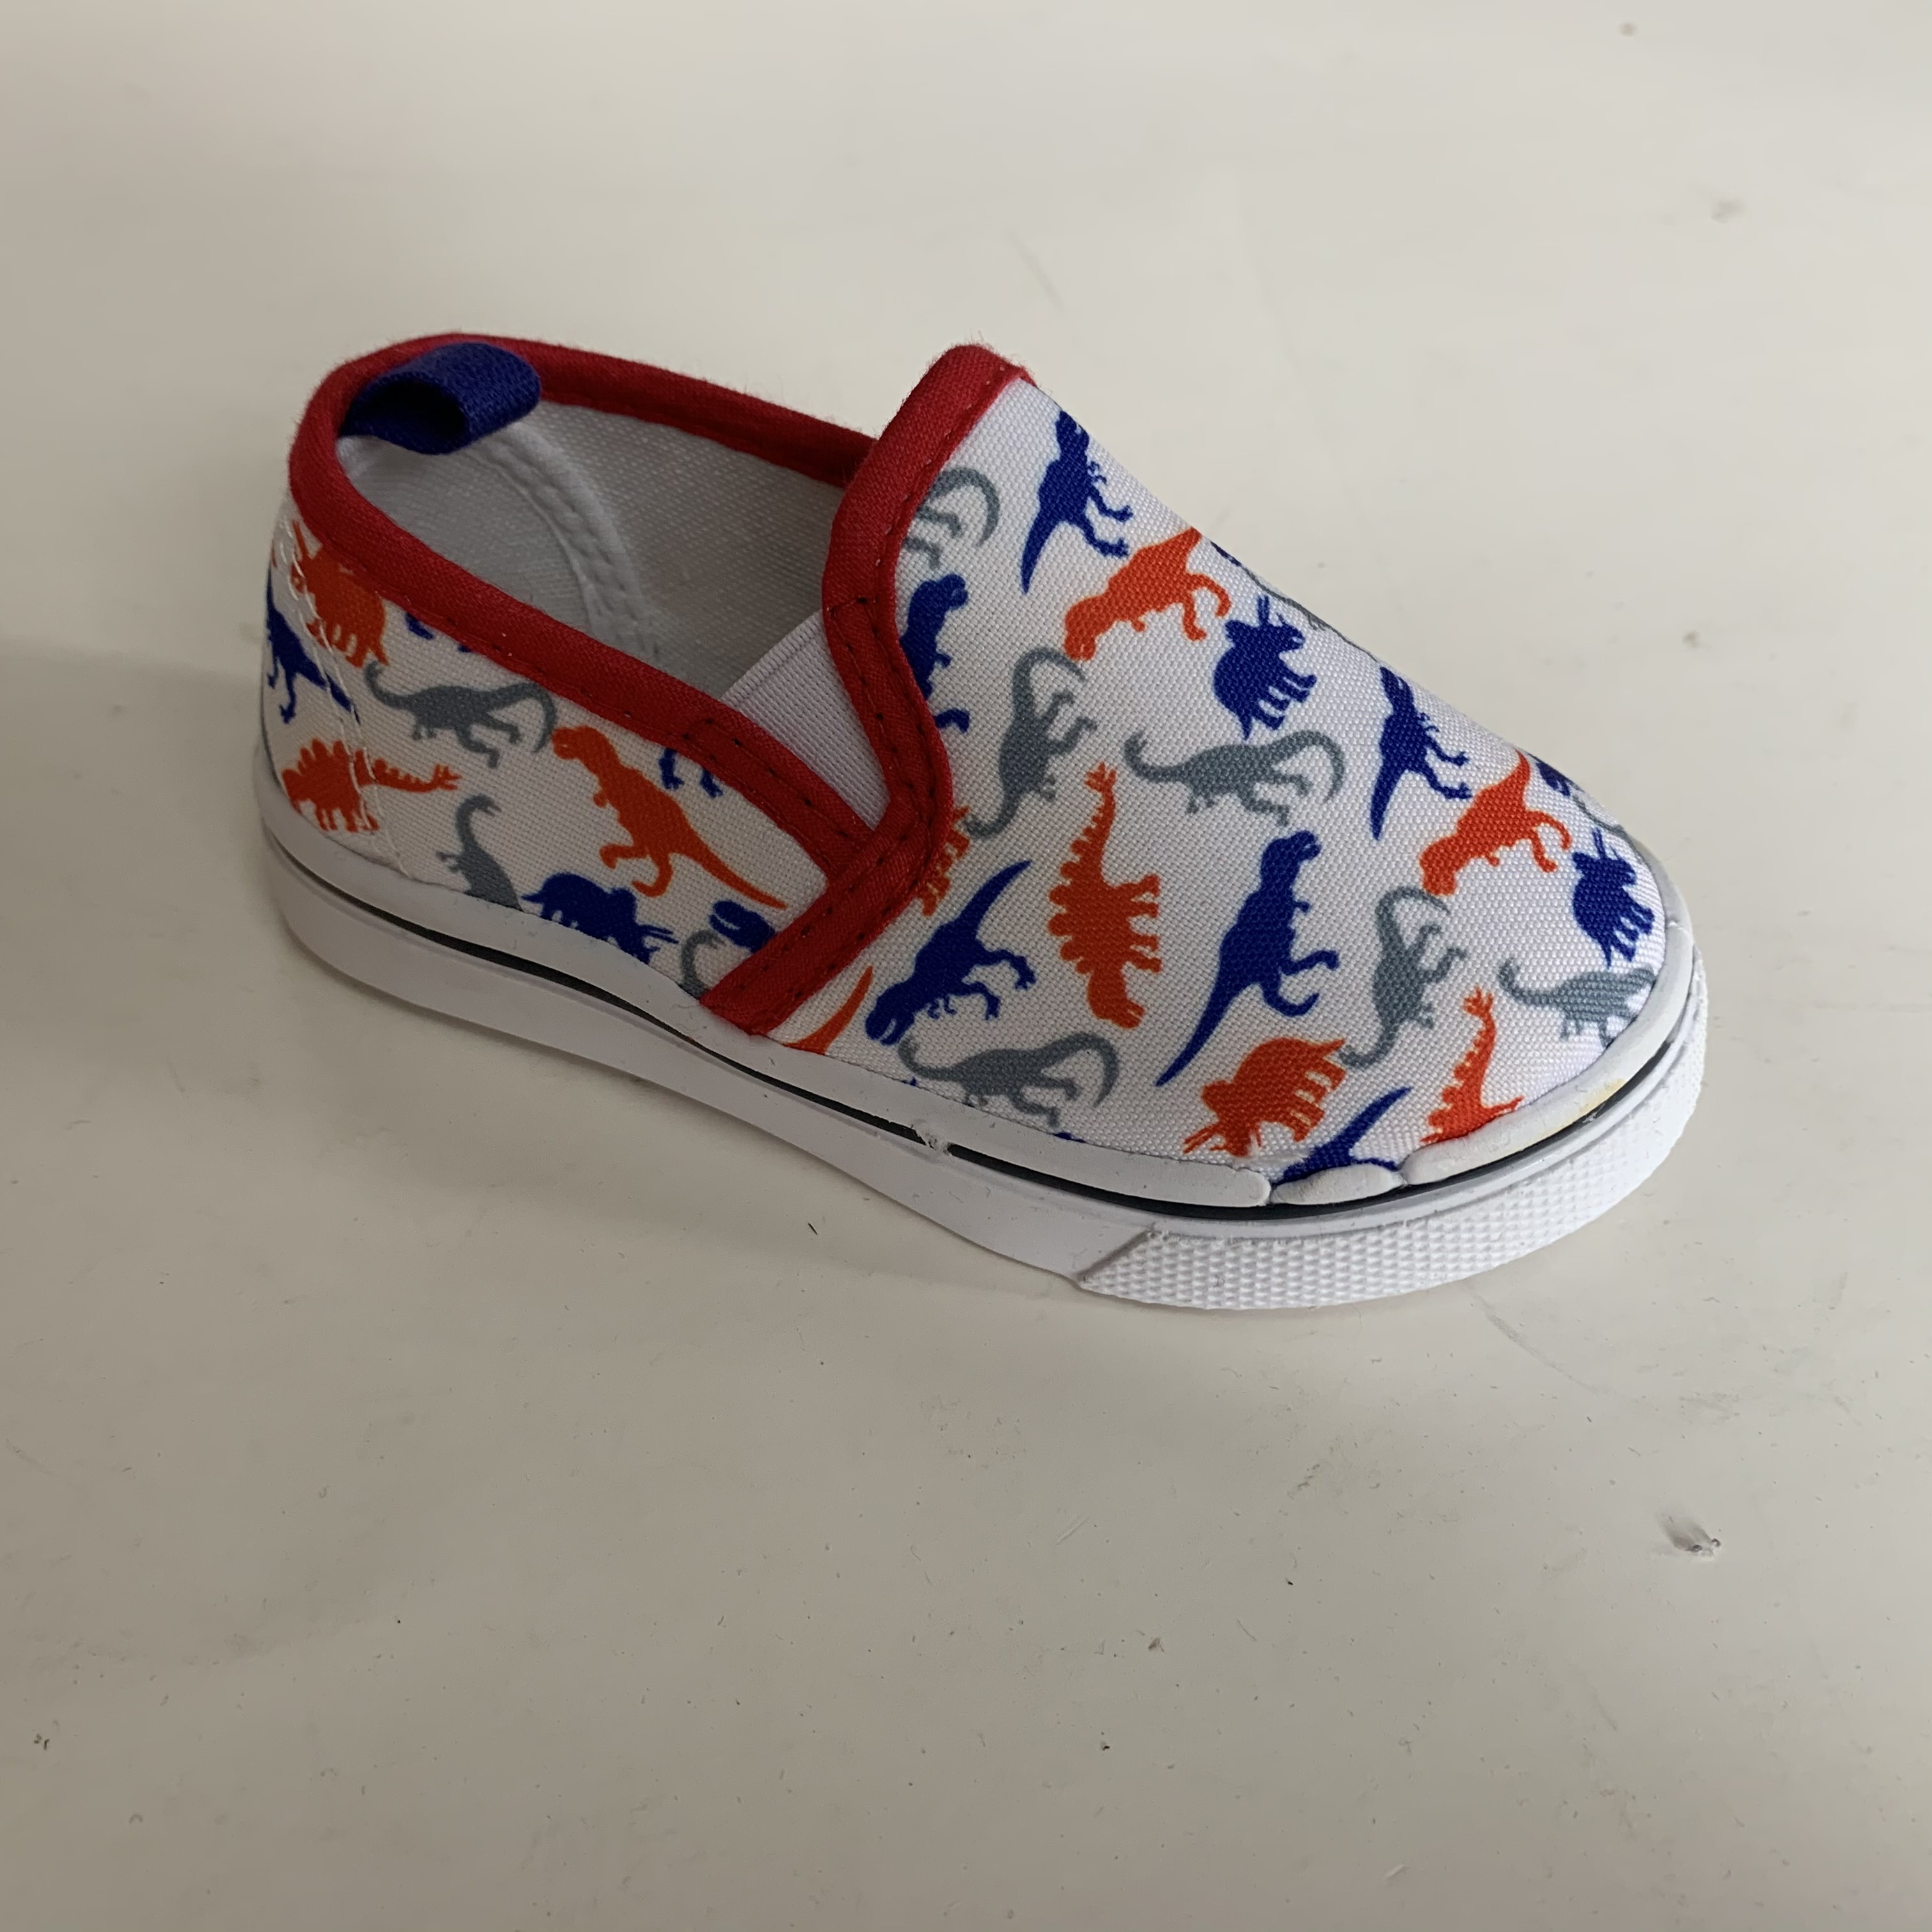 Toddler and Little Boys' Casual Slip-On Canvas Shoe